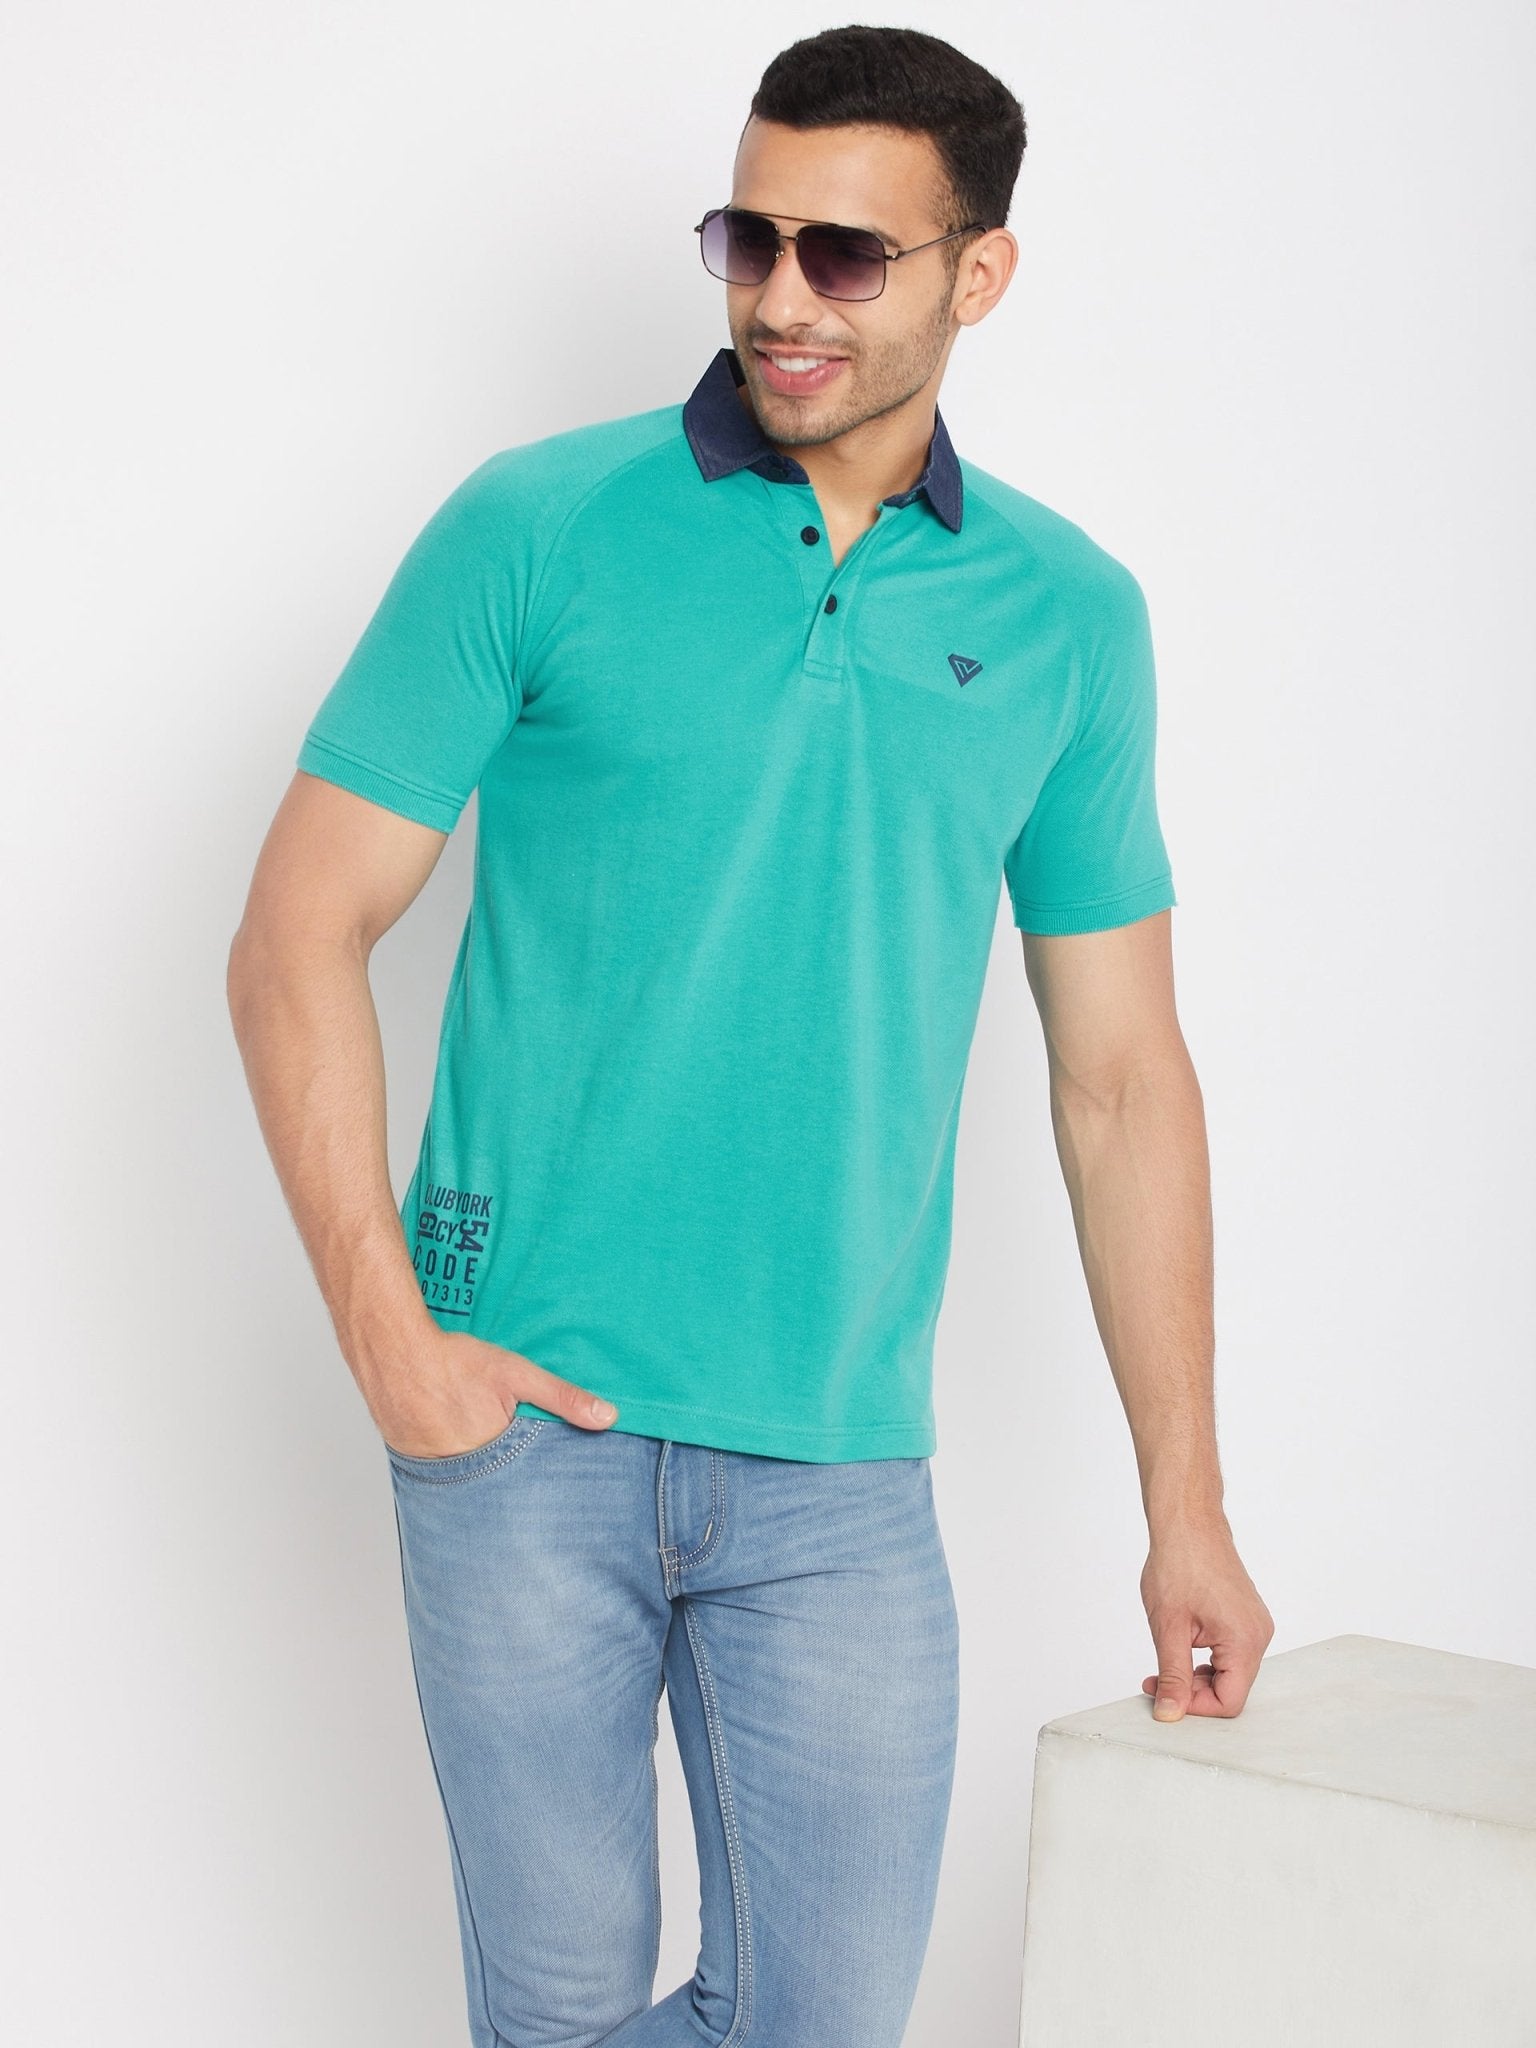 Turquoise Blue Polo T-Shirt - clubyork